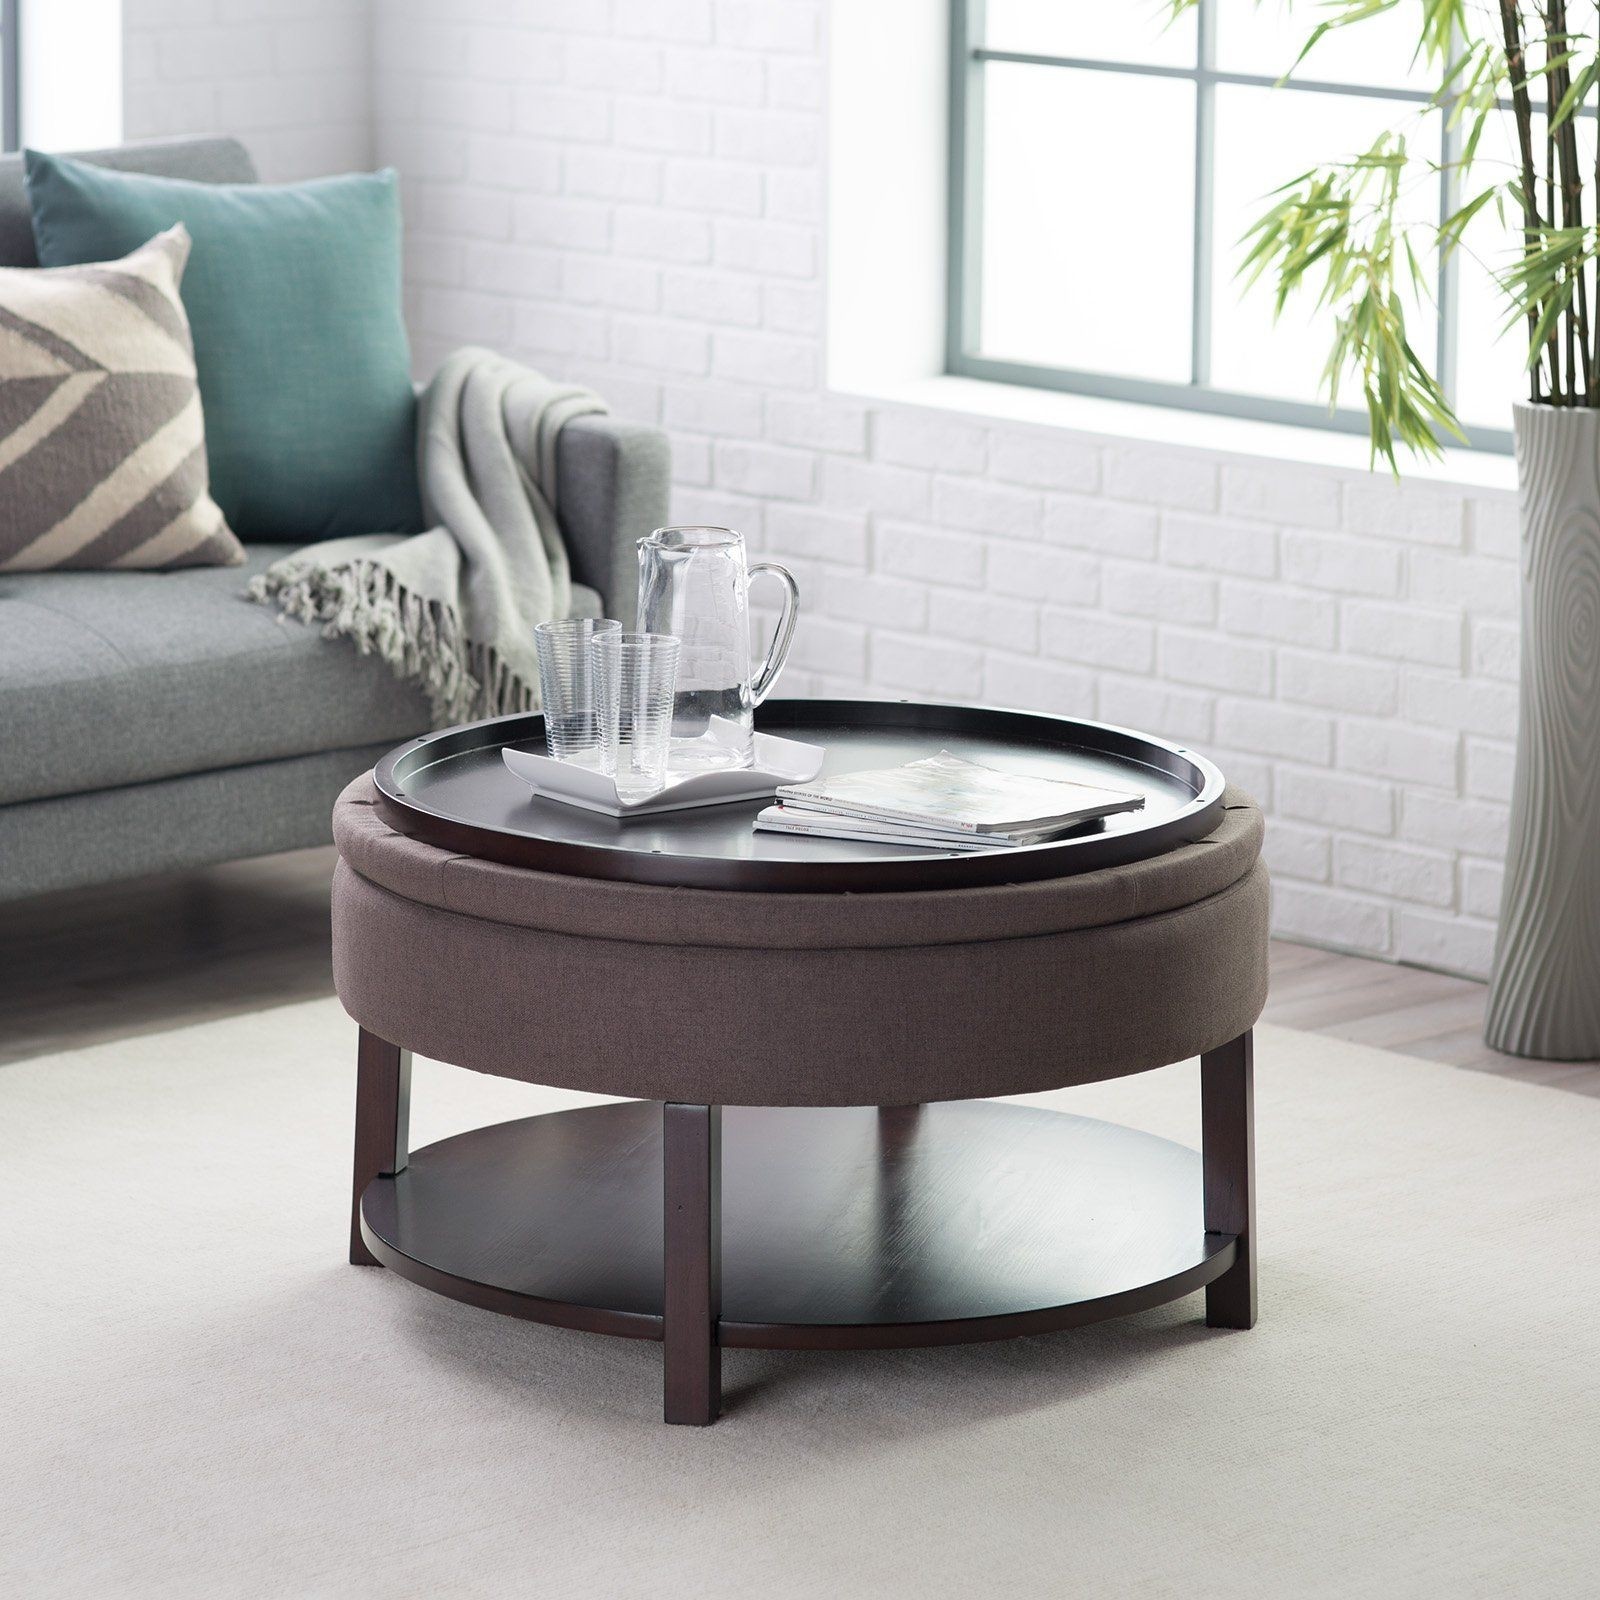 Round Ottoman Coffee Table With Storage - Ideas on Foter